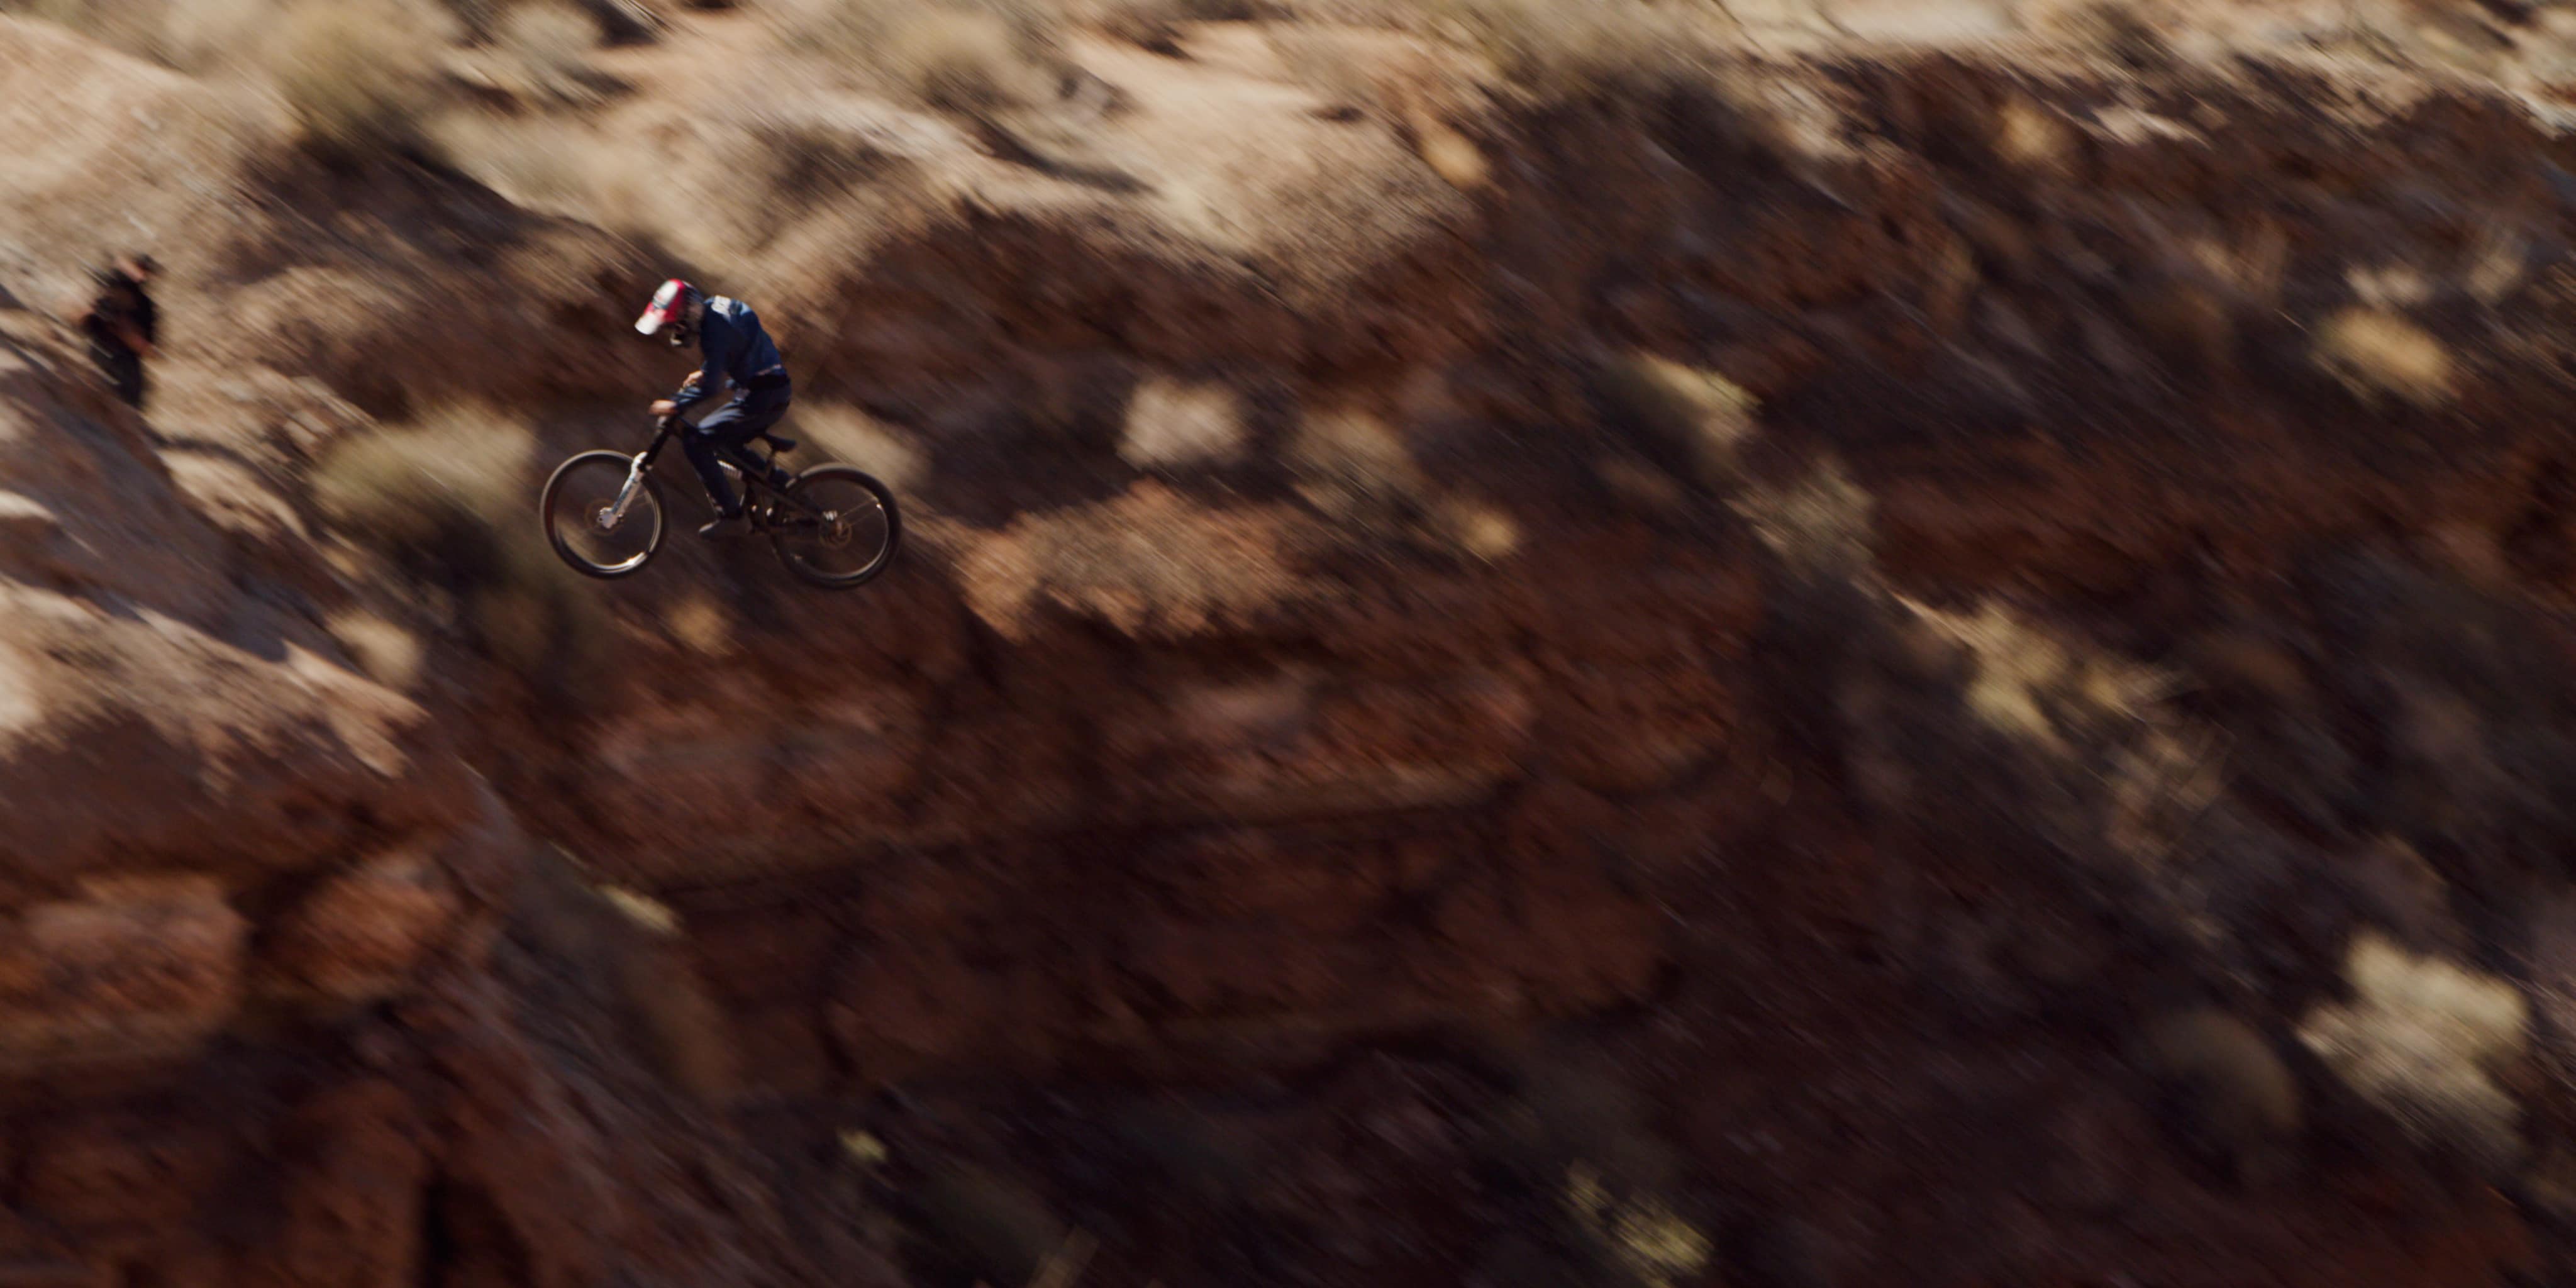 2021_ROC_Reed_Boggs_Shoot_4_Rampage_Frame_11